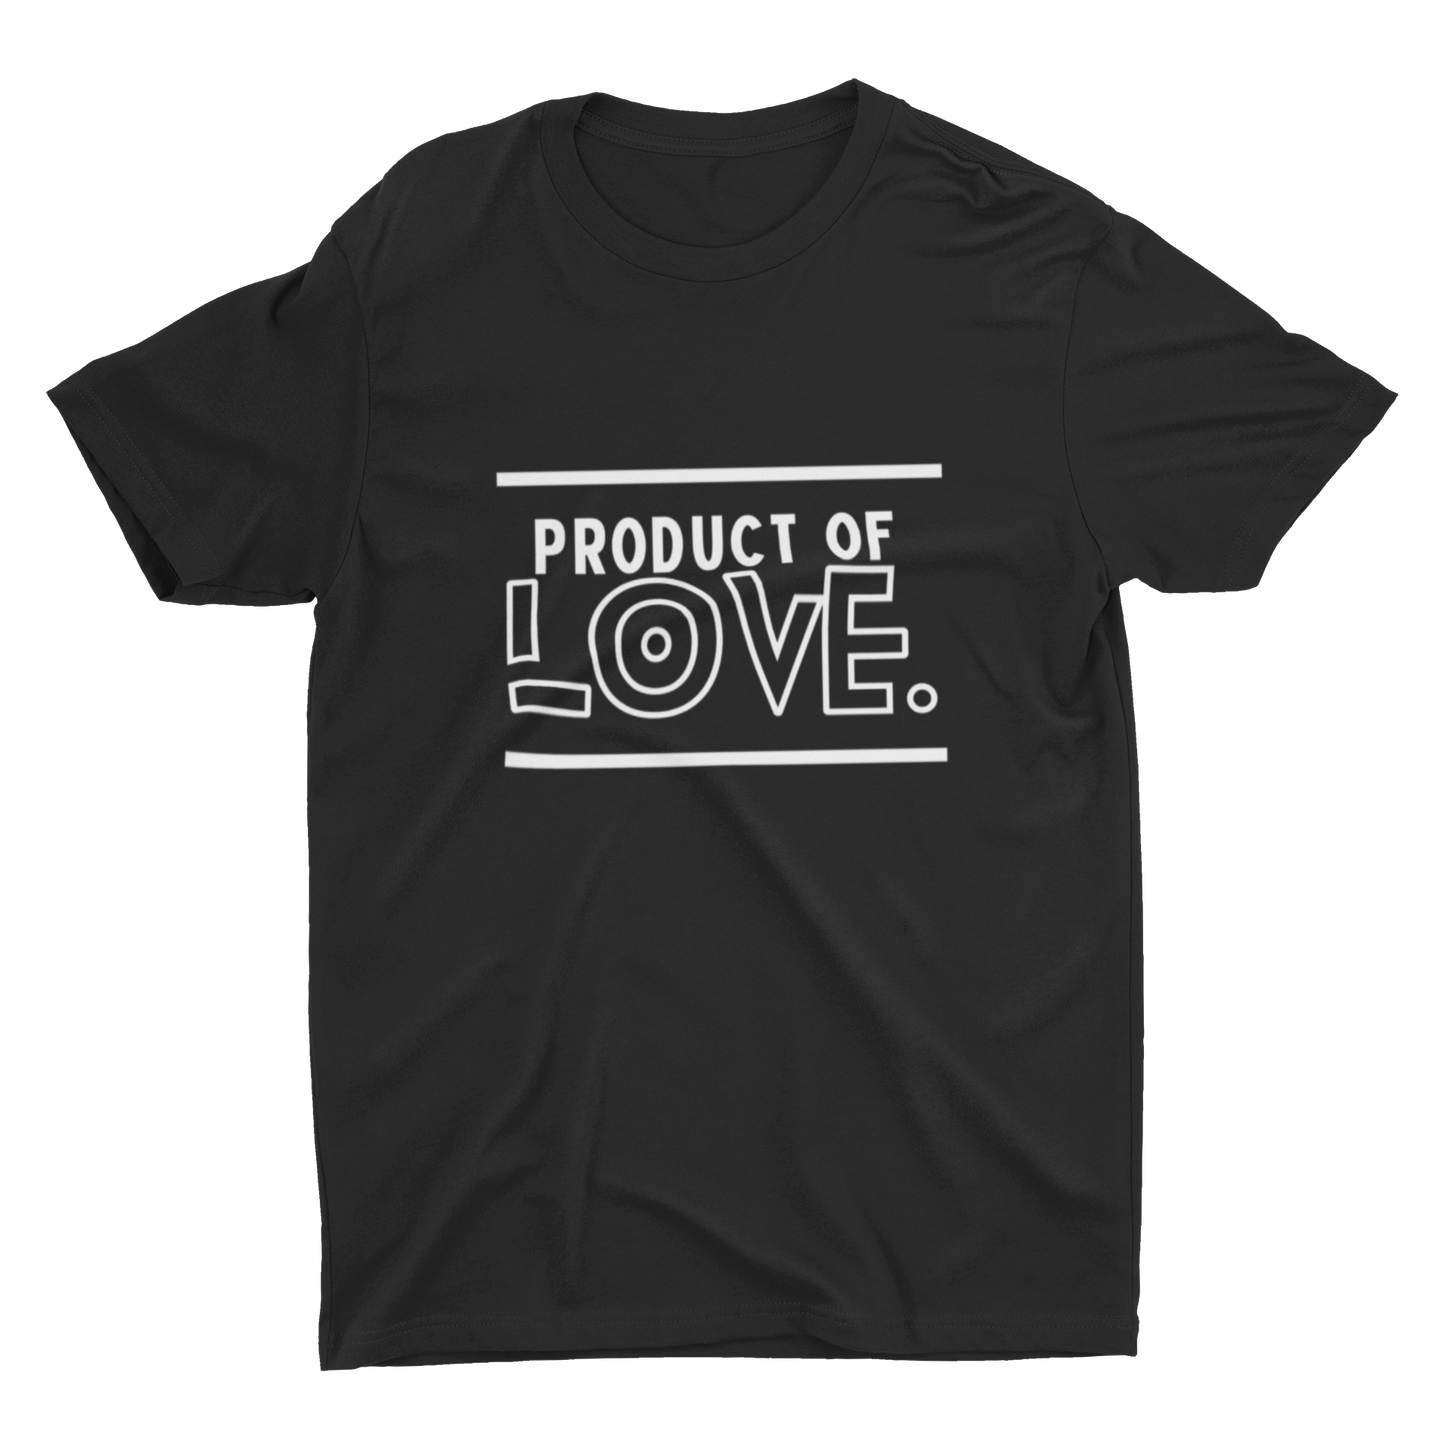 PRODUCT OF LOVE TEE